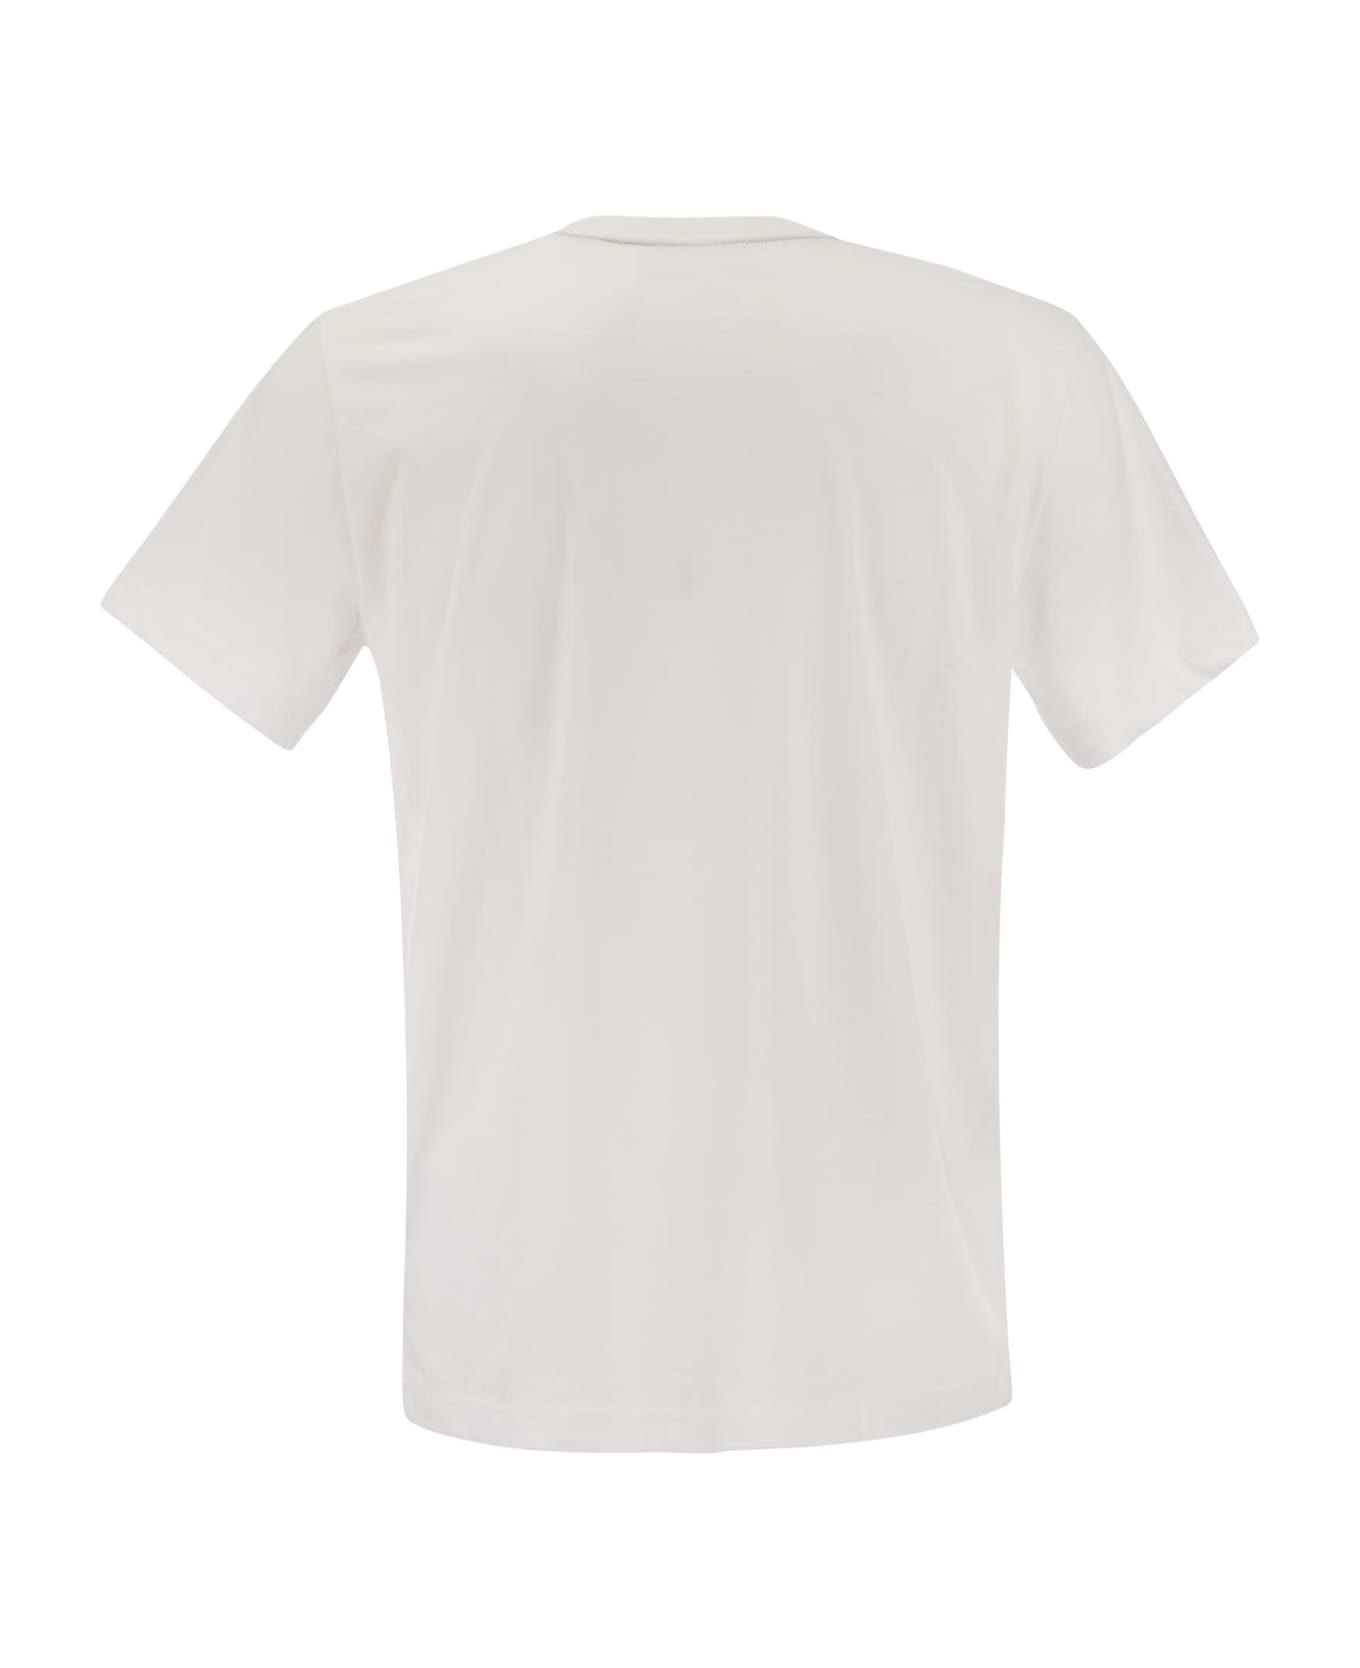 Fay White T-shirt With Pocket - White シャツ